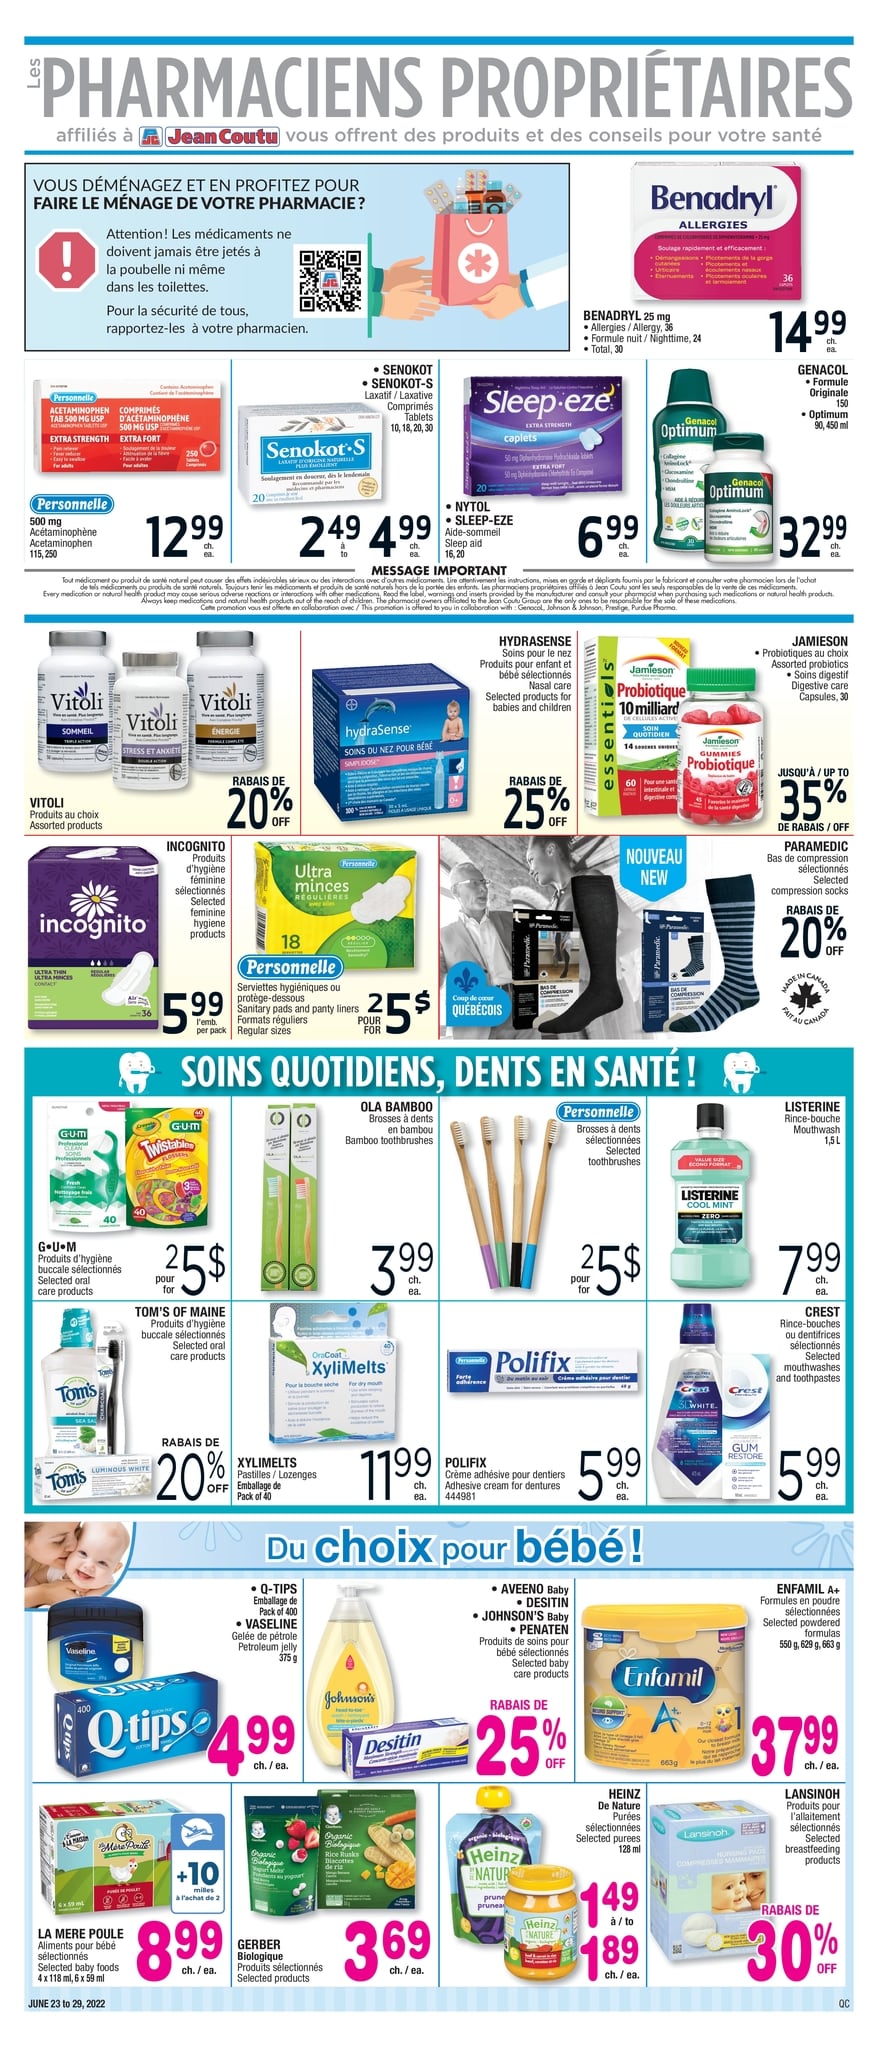 Circulaire Jean Coutu - Page 4